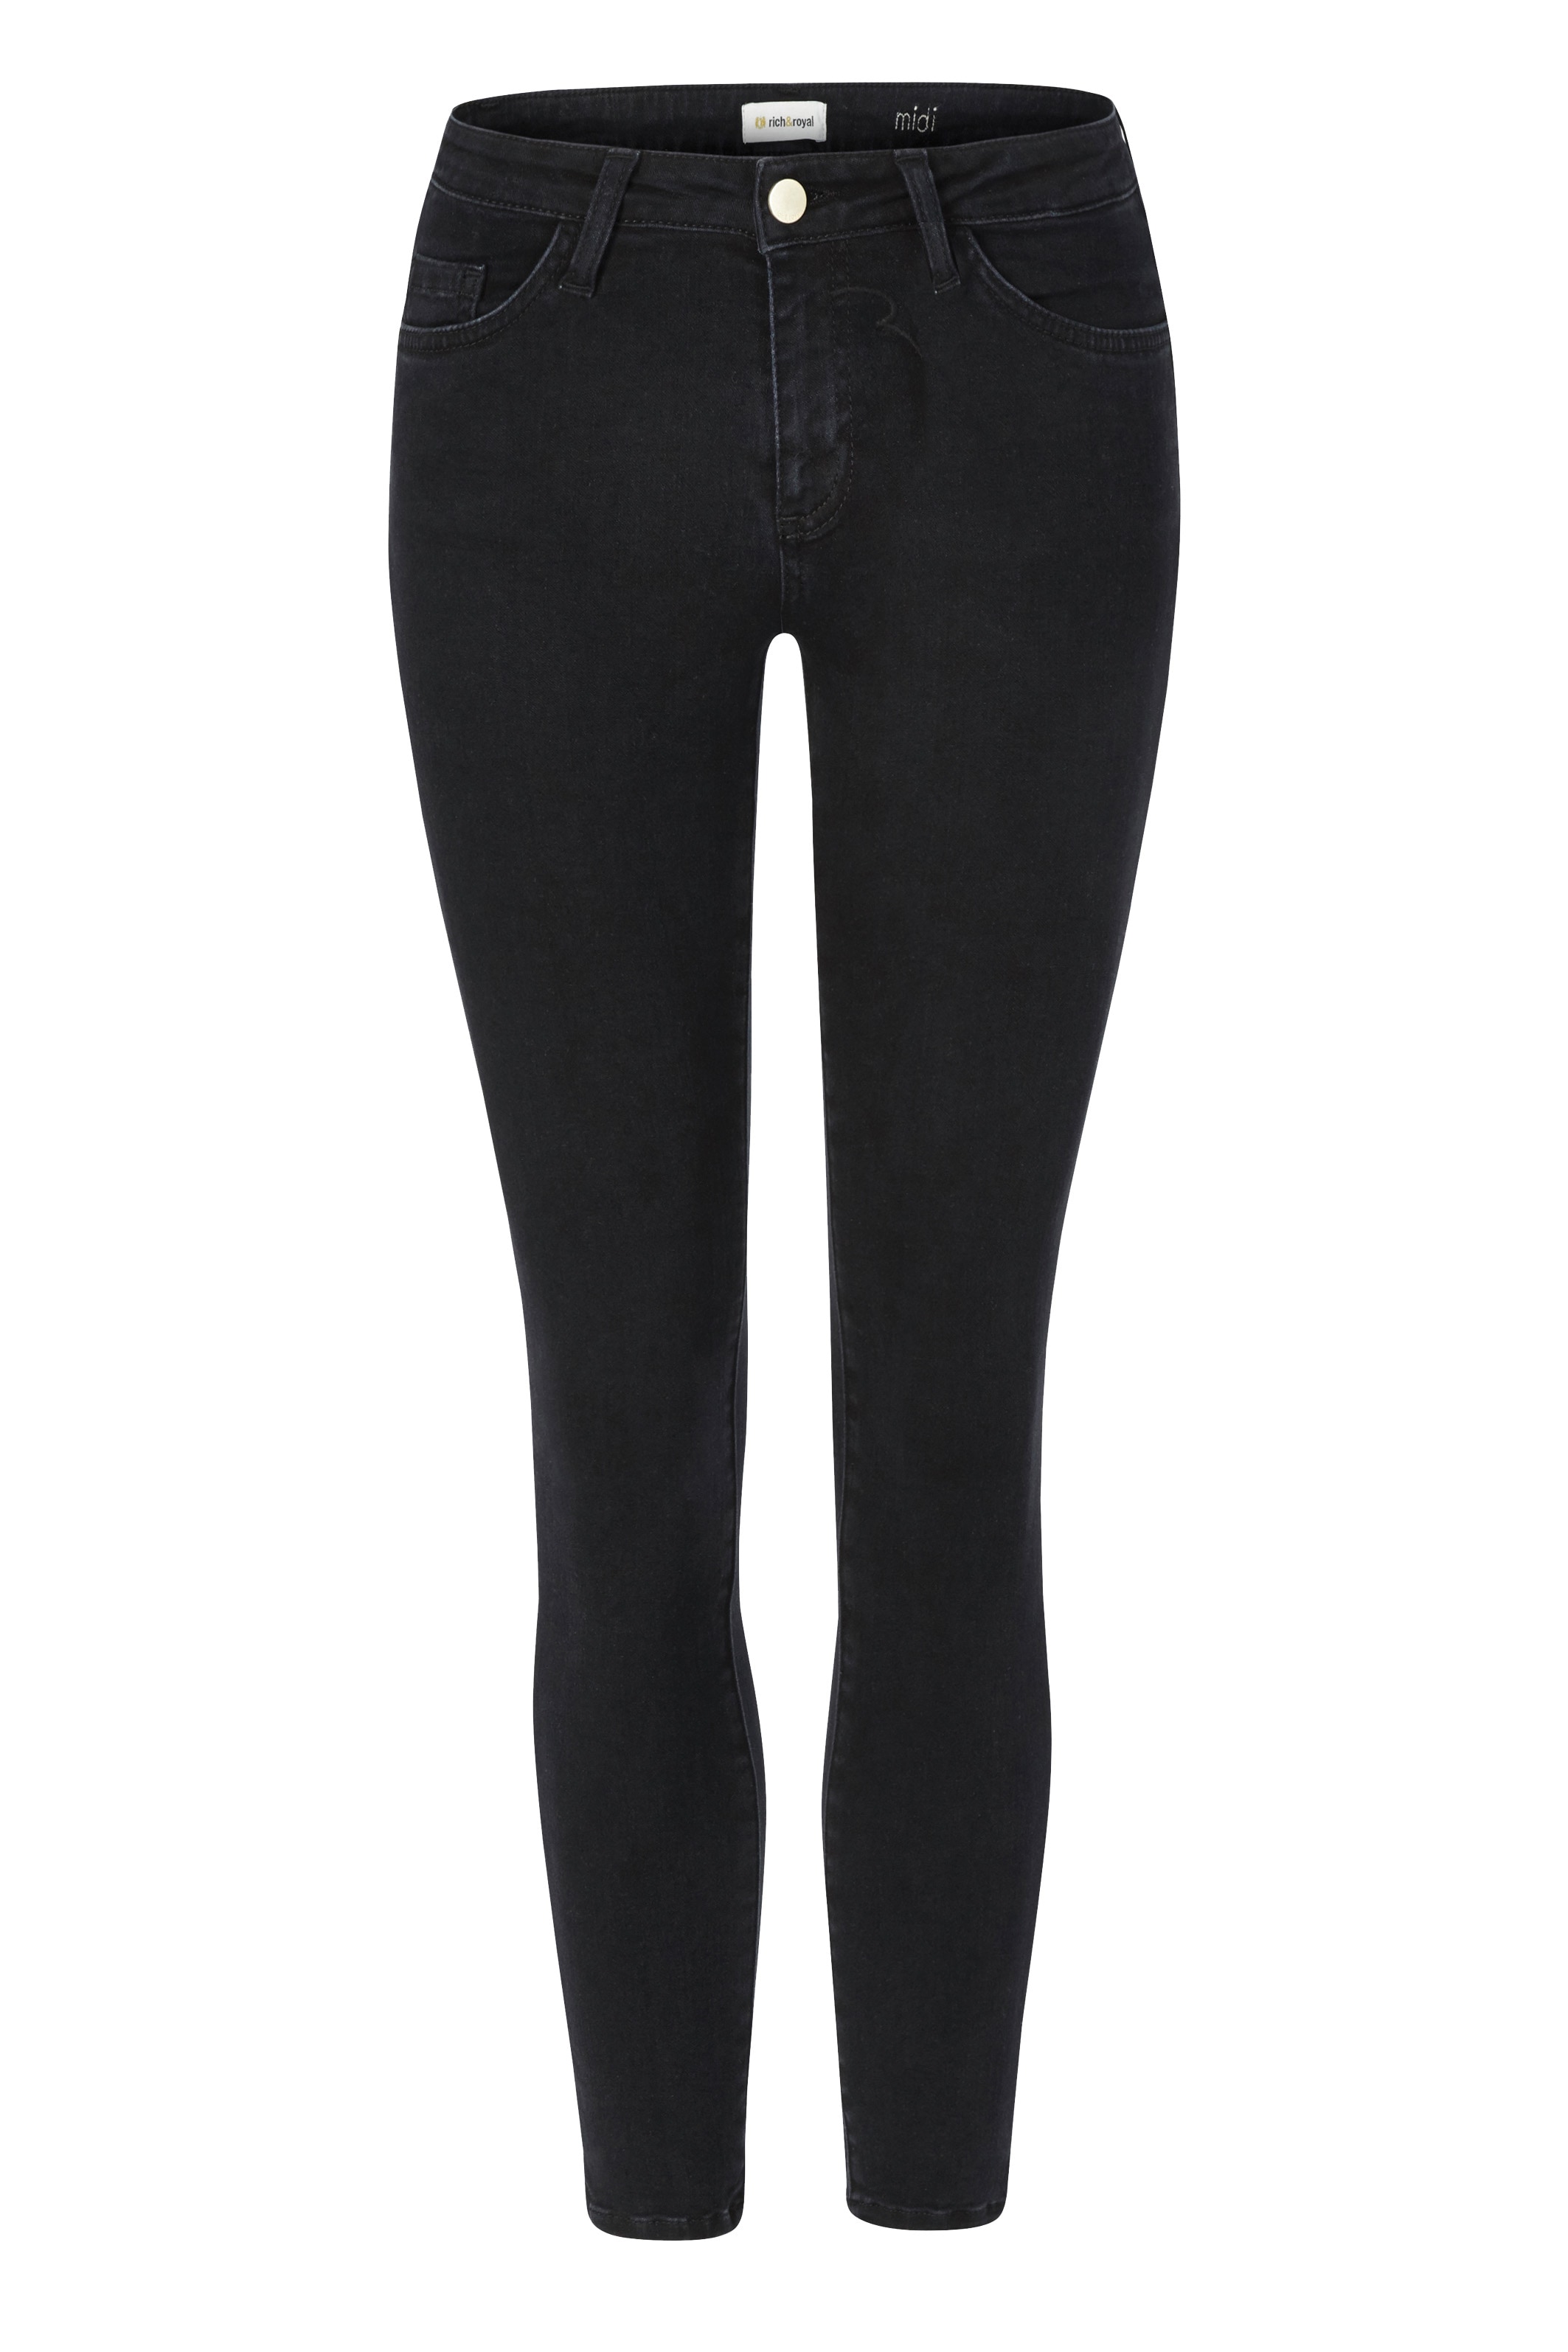 Rich & Royal Skinny-fit-Jeans, im cleanen Look